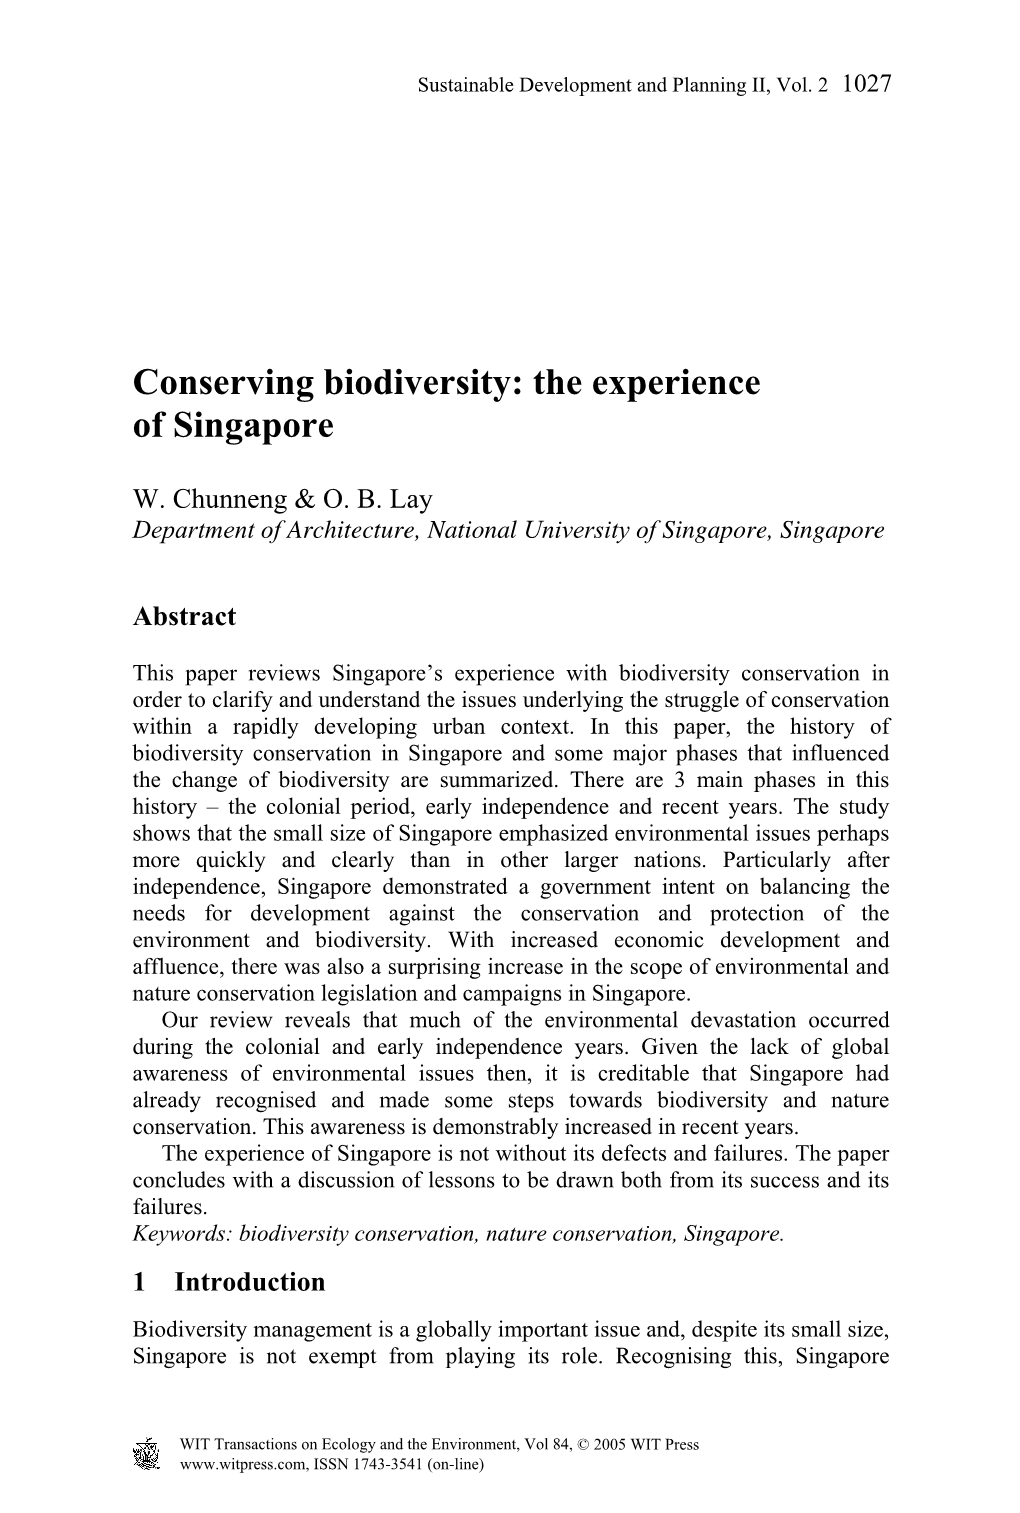 Conserving Biodiversity: the Experience of Singapore